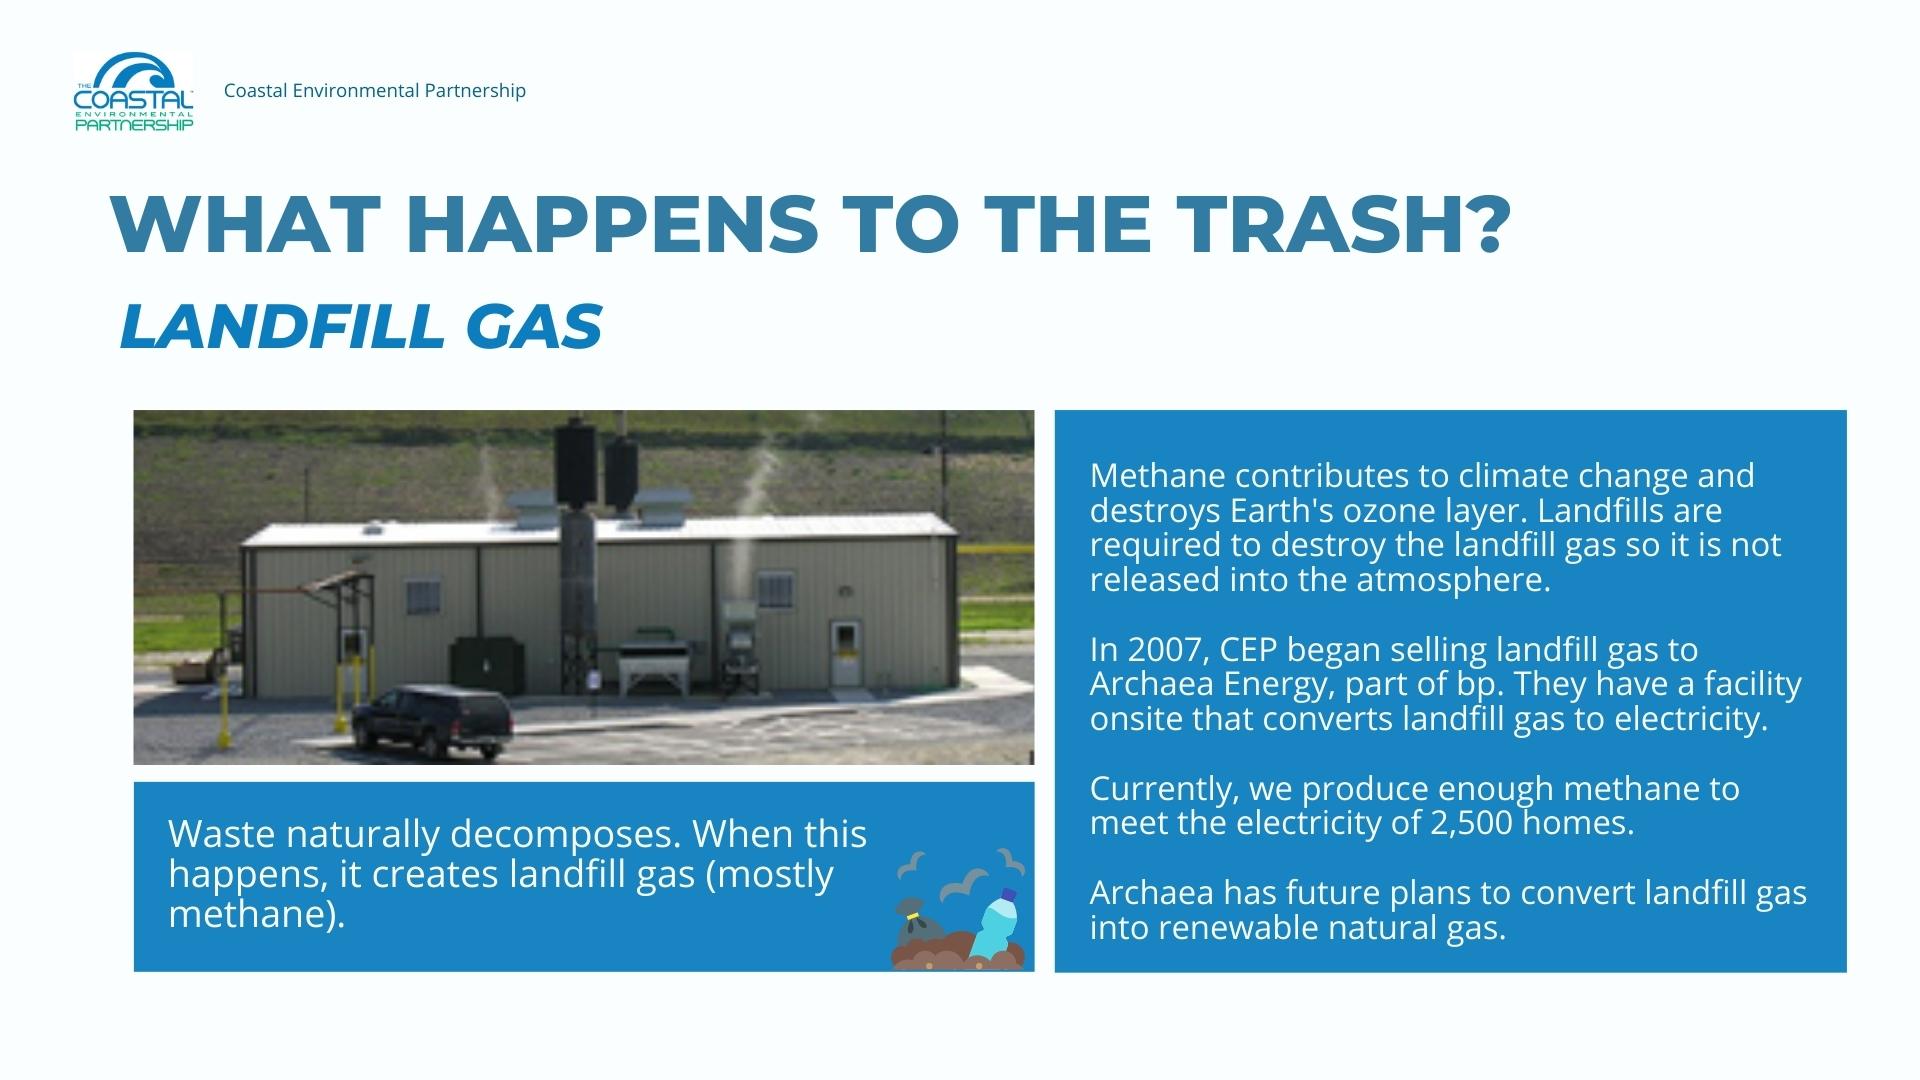 Text: Waste naturally decomposes. When this happens, it creates landfill gas (mostly methane). Methane contributes to climate change and destroys Earth's ozone layer. Landfills are required to destroy the landfill gas so it is not released into the atmosphere. In 2007, CEP began selling landfill gas to Archaea Energy, part of BP. They have a facility on-site that converts landfill gas to electricity. Currently, we produce enough methane to meet the electricity needs of 2,500 homes. 